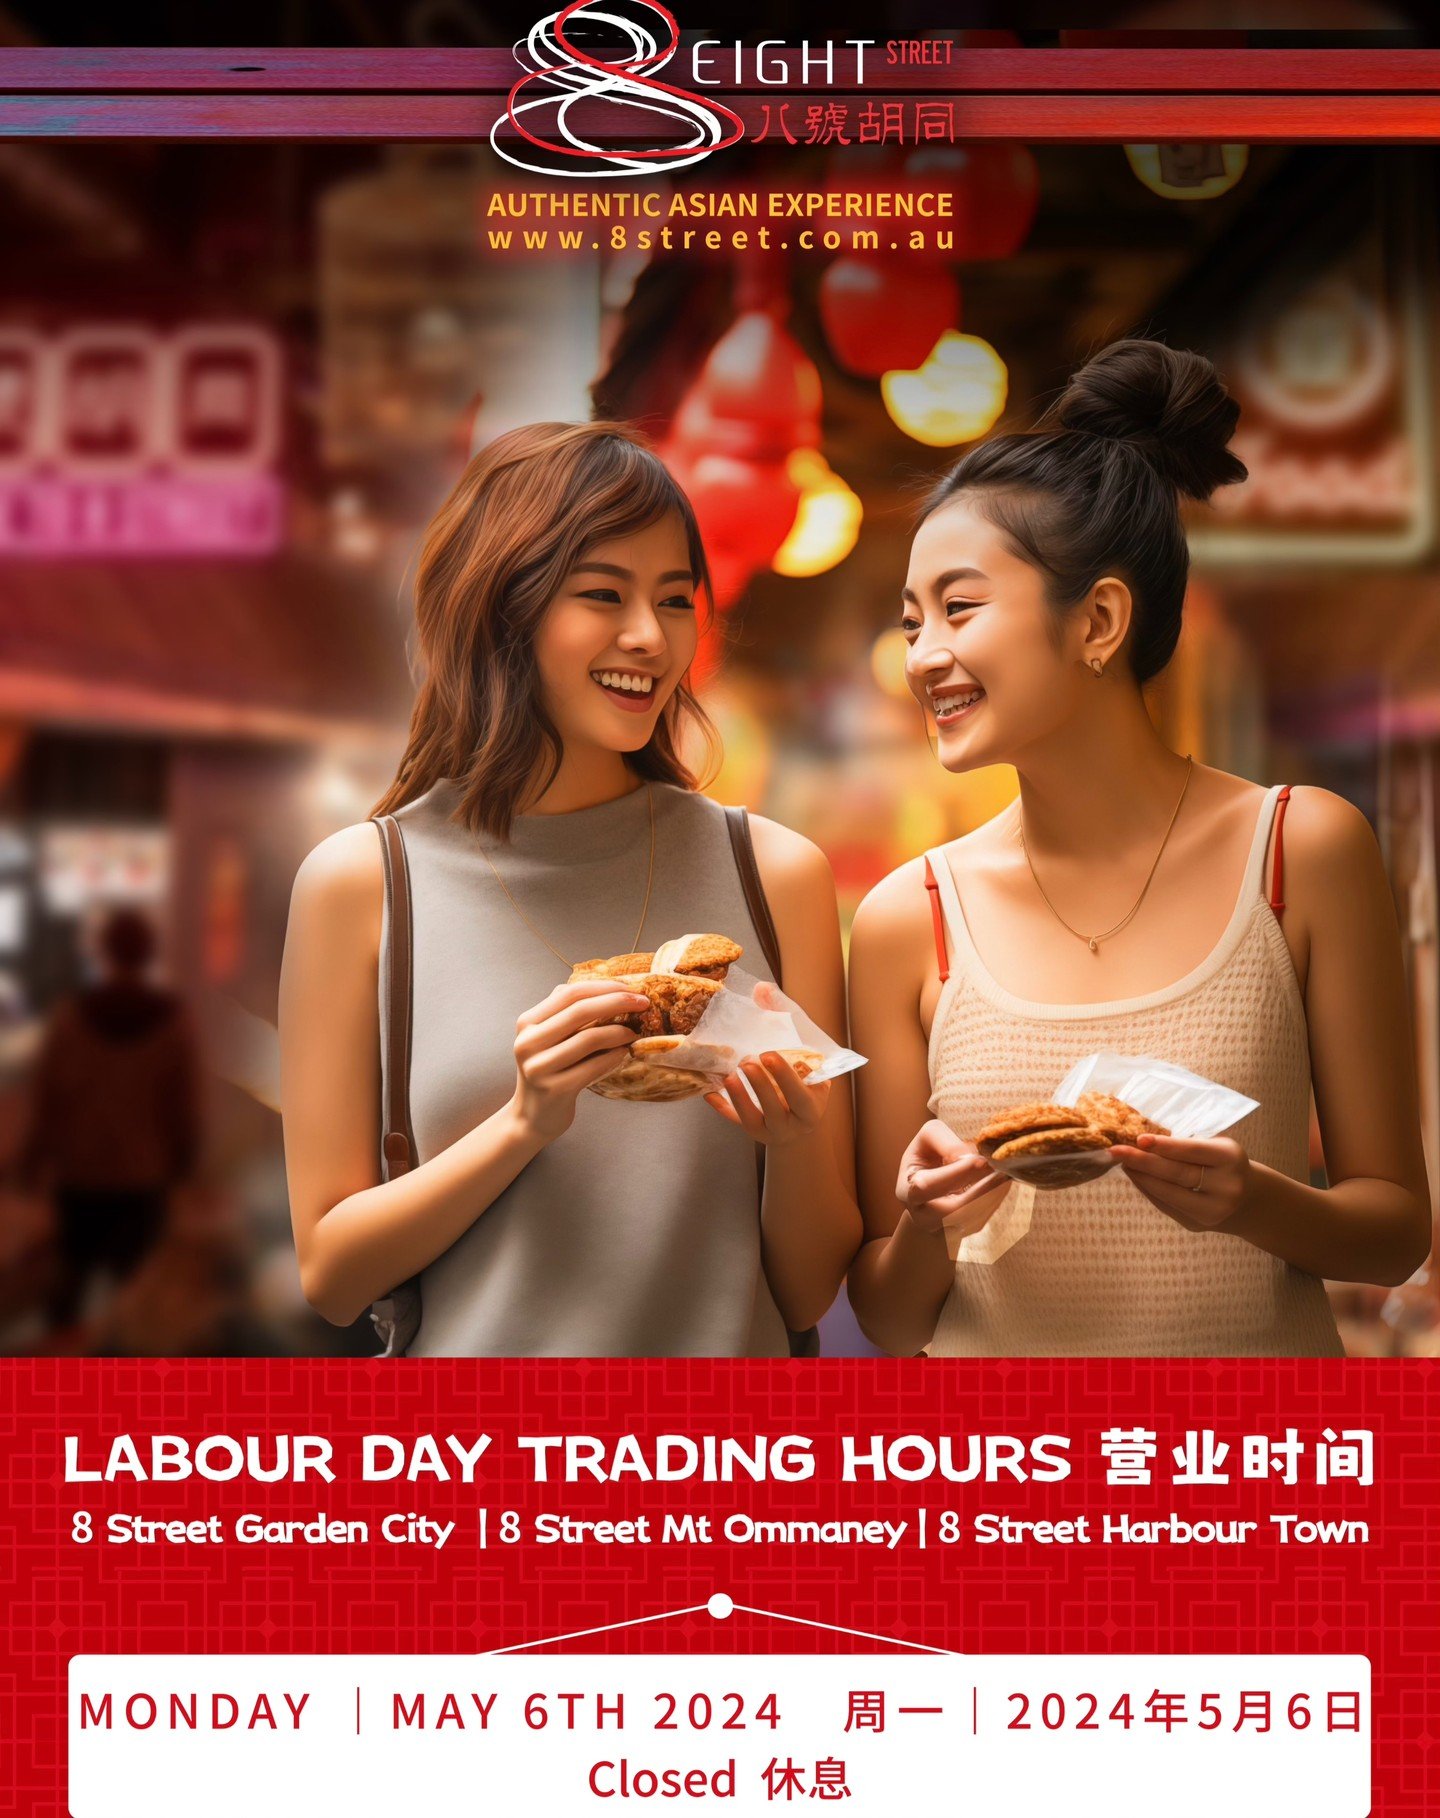 Please note that we will be closed for Labor Day. Wishing you and your family a fantastic long weekend!

#8streetgardencity #8streetmtgravatt #brisbanefood #brisbanefoodie #brisbanefoodies #asianfood #brisbaneasianfood #asianfoodbrisbane #brisbanelif